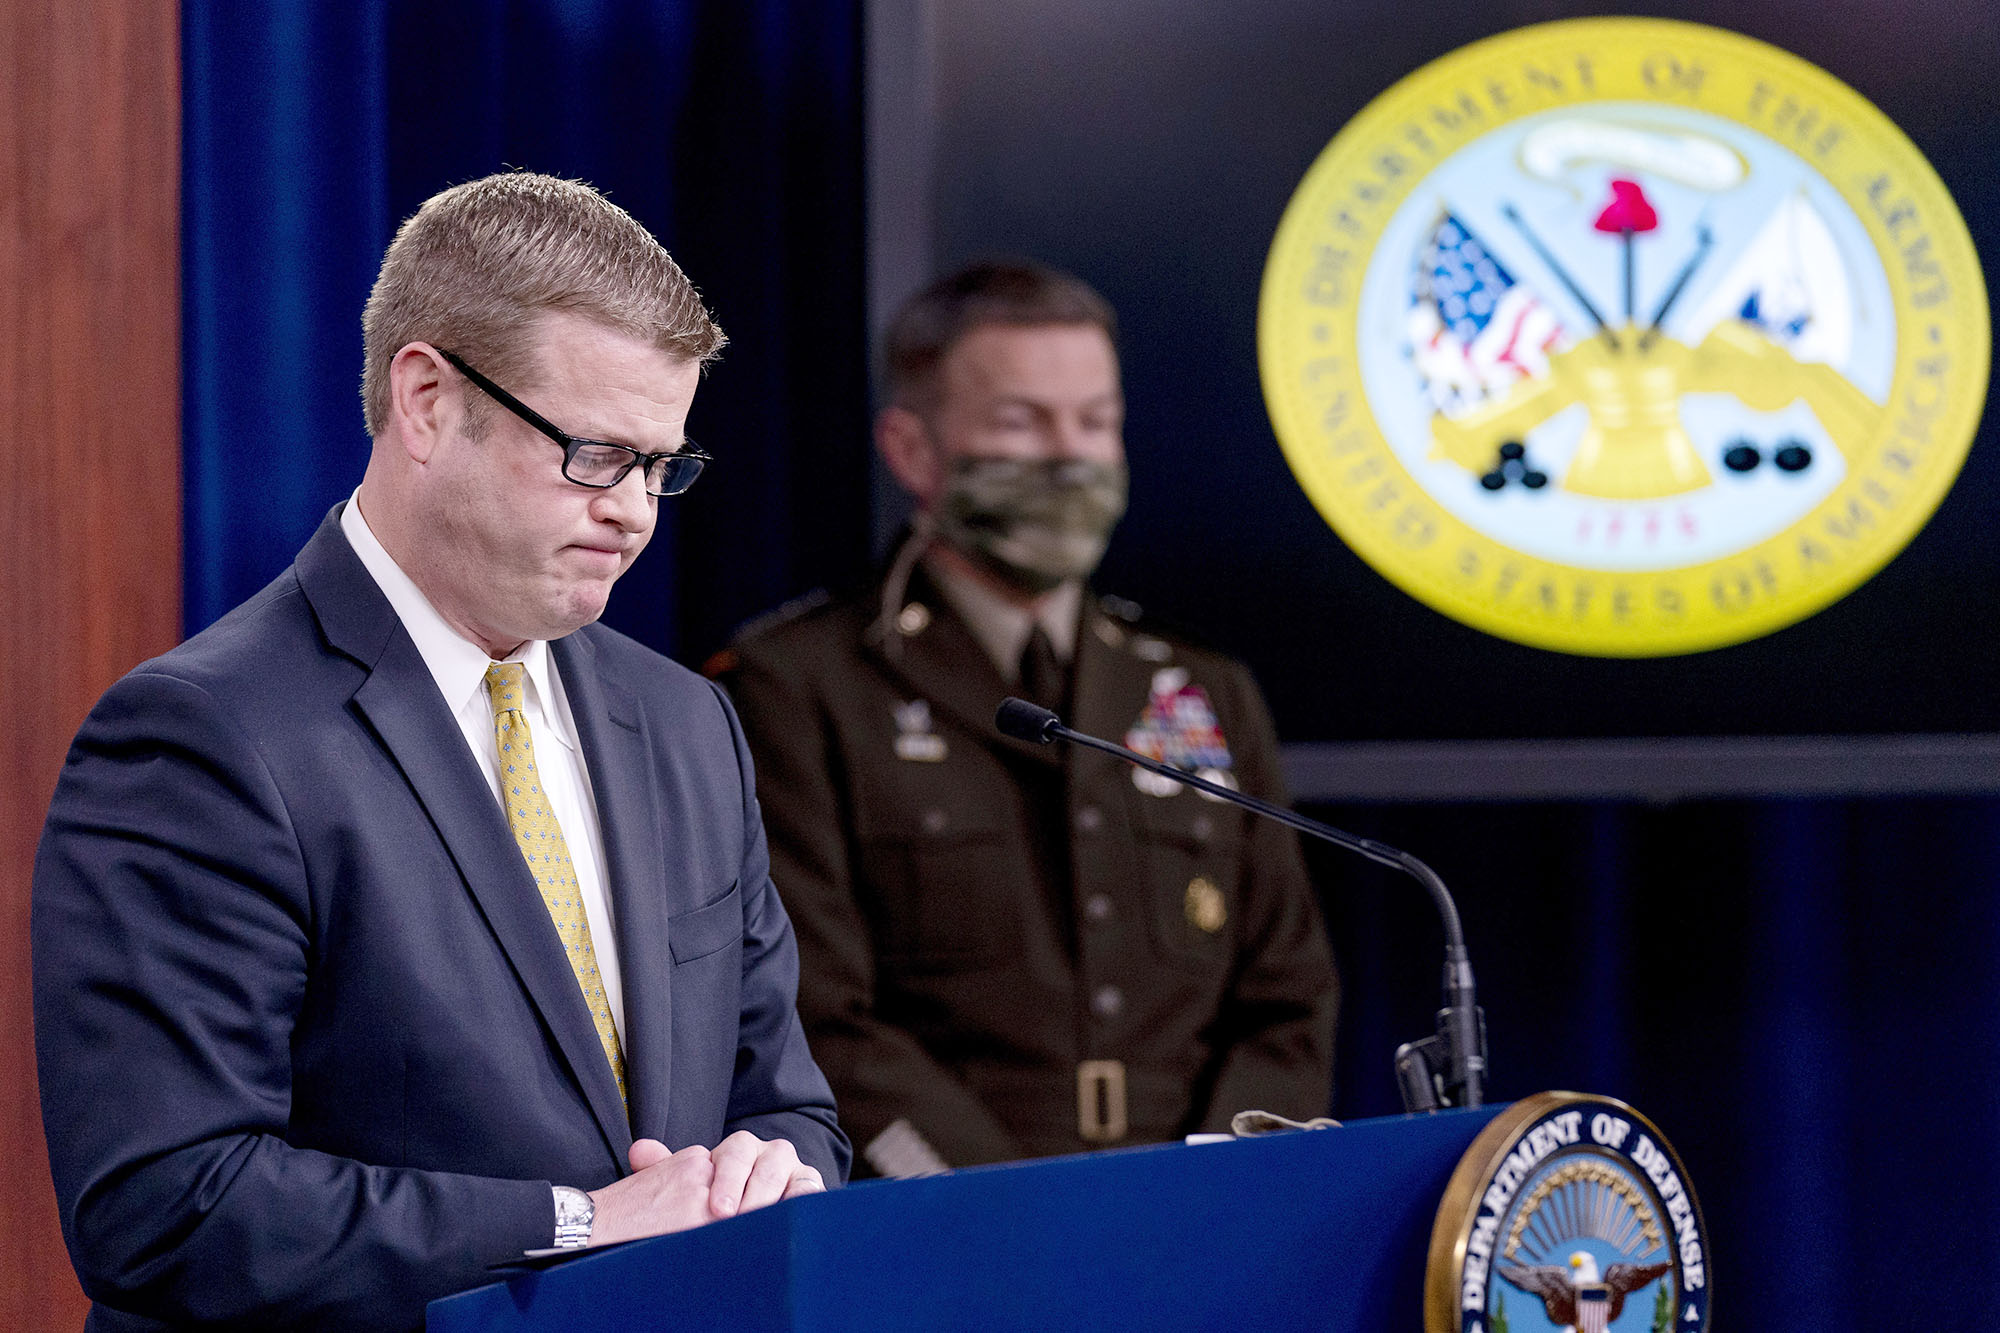 PHOTO: Secretary of the Army Ryan McCarthy accompanied by Gen. James McConville, Chief of Staff of the Army pauses while speaking about an investigation into Fort Hood, Texas at the Pentagon, Dec. 8, 2020